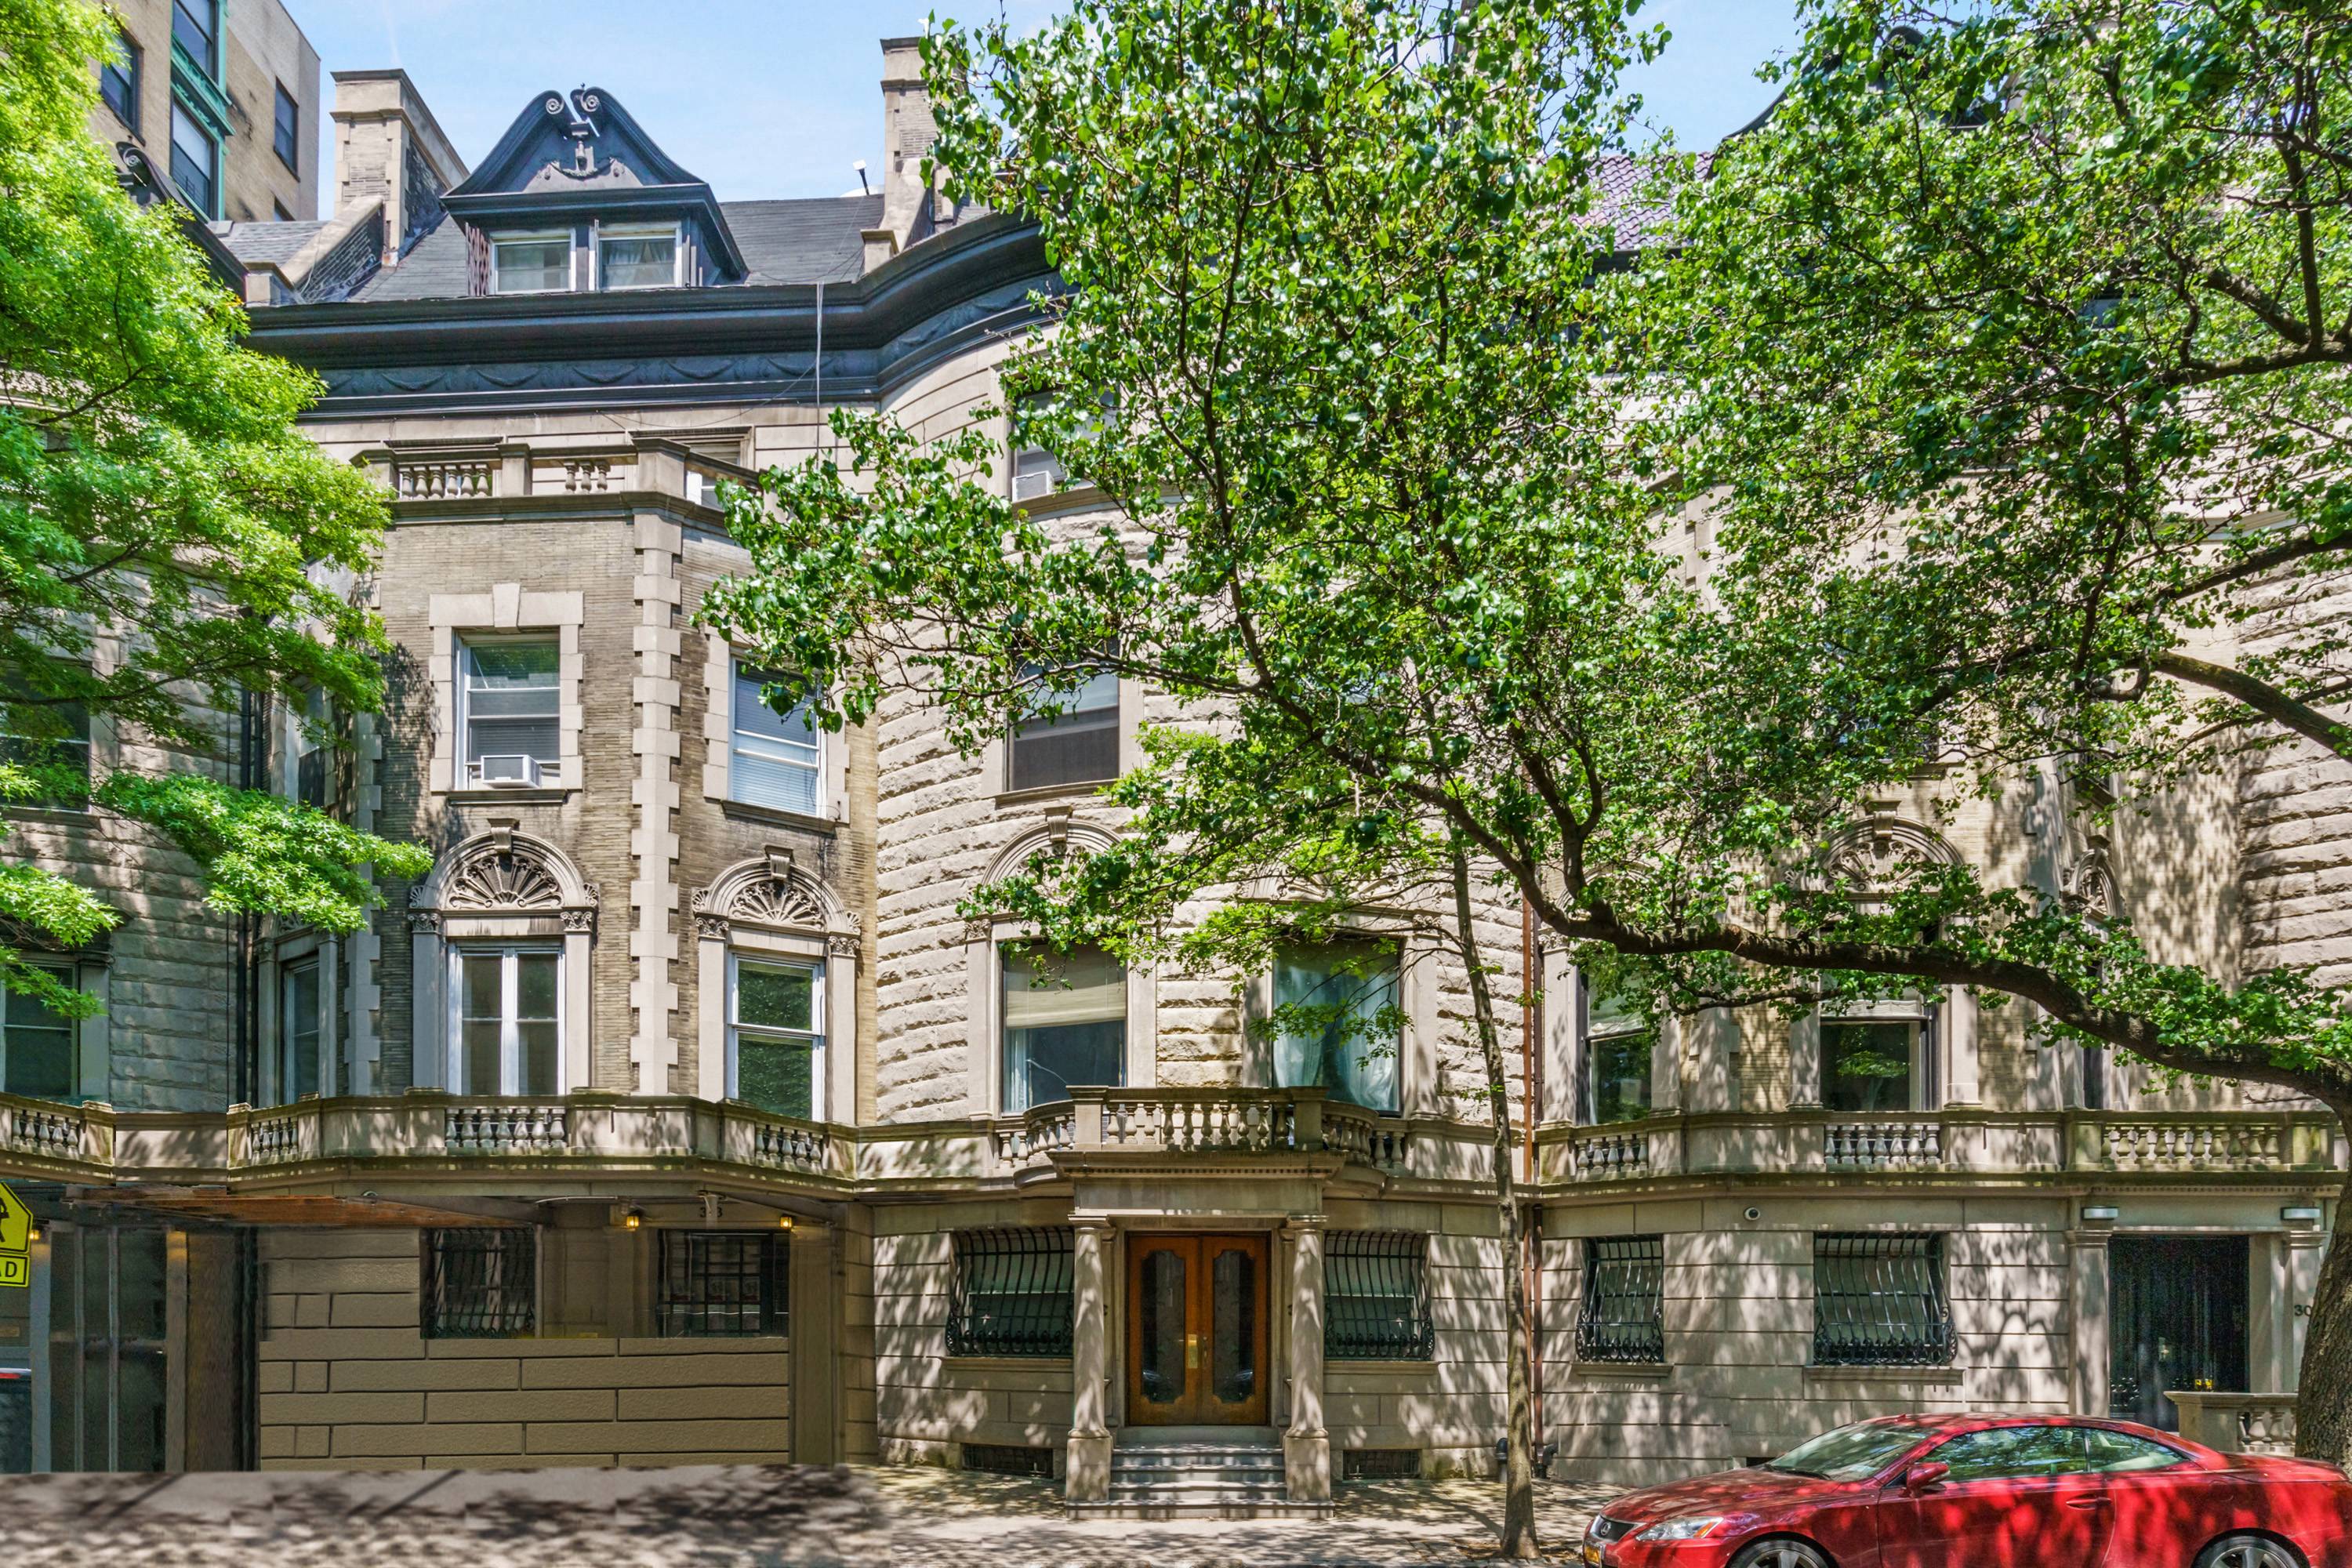 Built in 1899, this NYC Riverside West End Historic District Mansion combines period design with architectural distinction when notable architects such as its designer, Clarence True created homes as masterpieces.